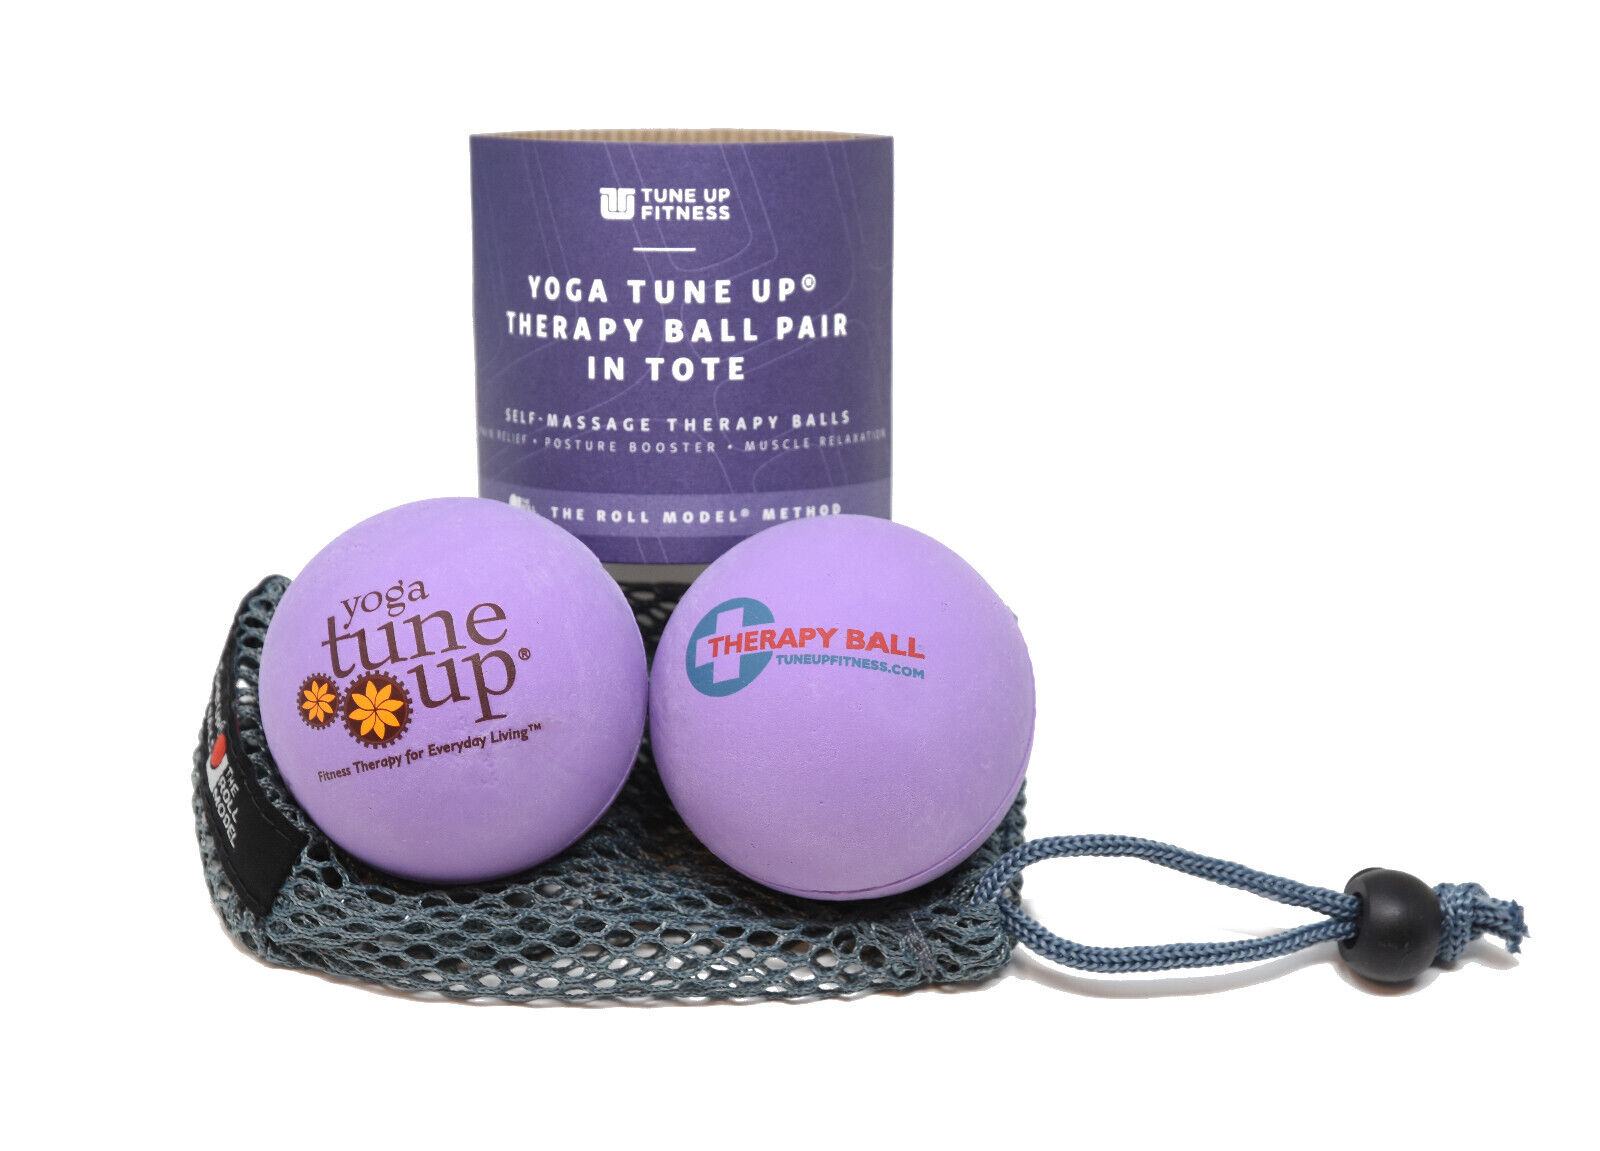 Yoga Tune Up Tune Up Fitness Jill Miller's Massage Therapy Balls Purple New